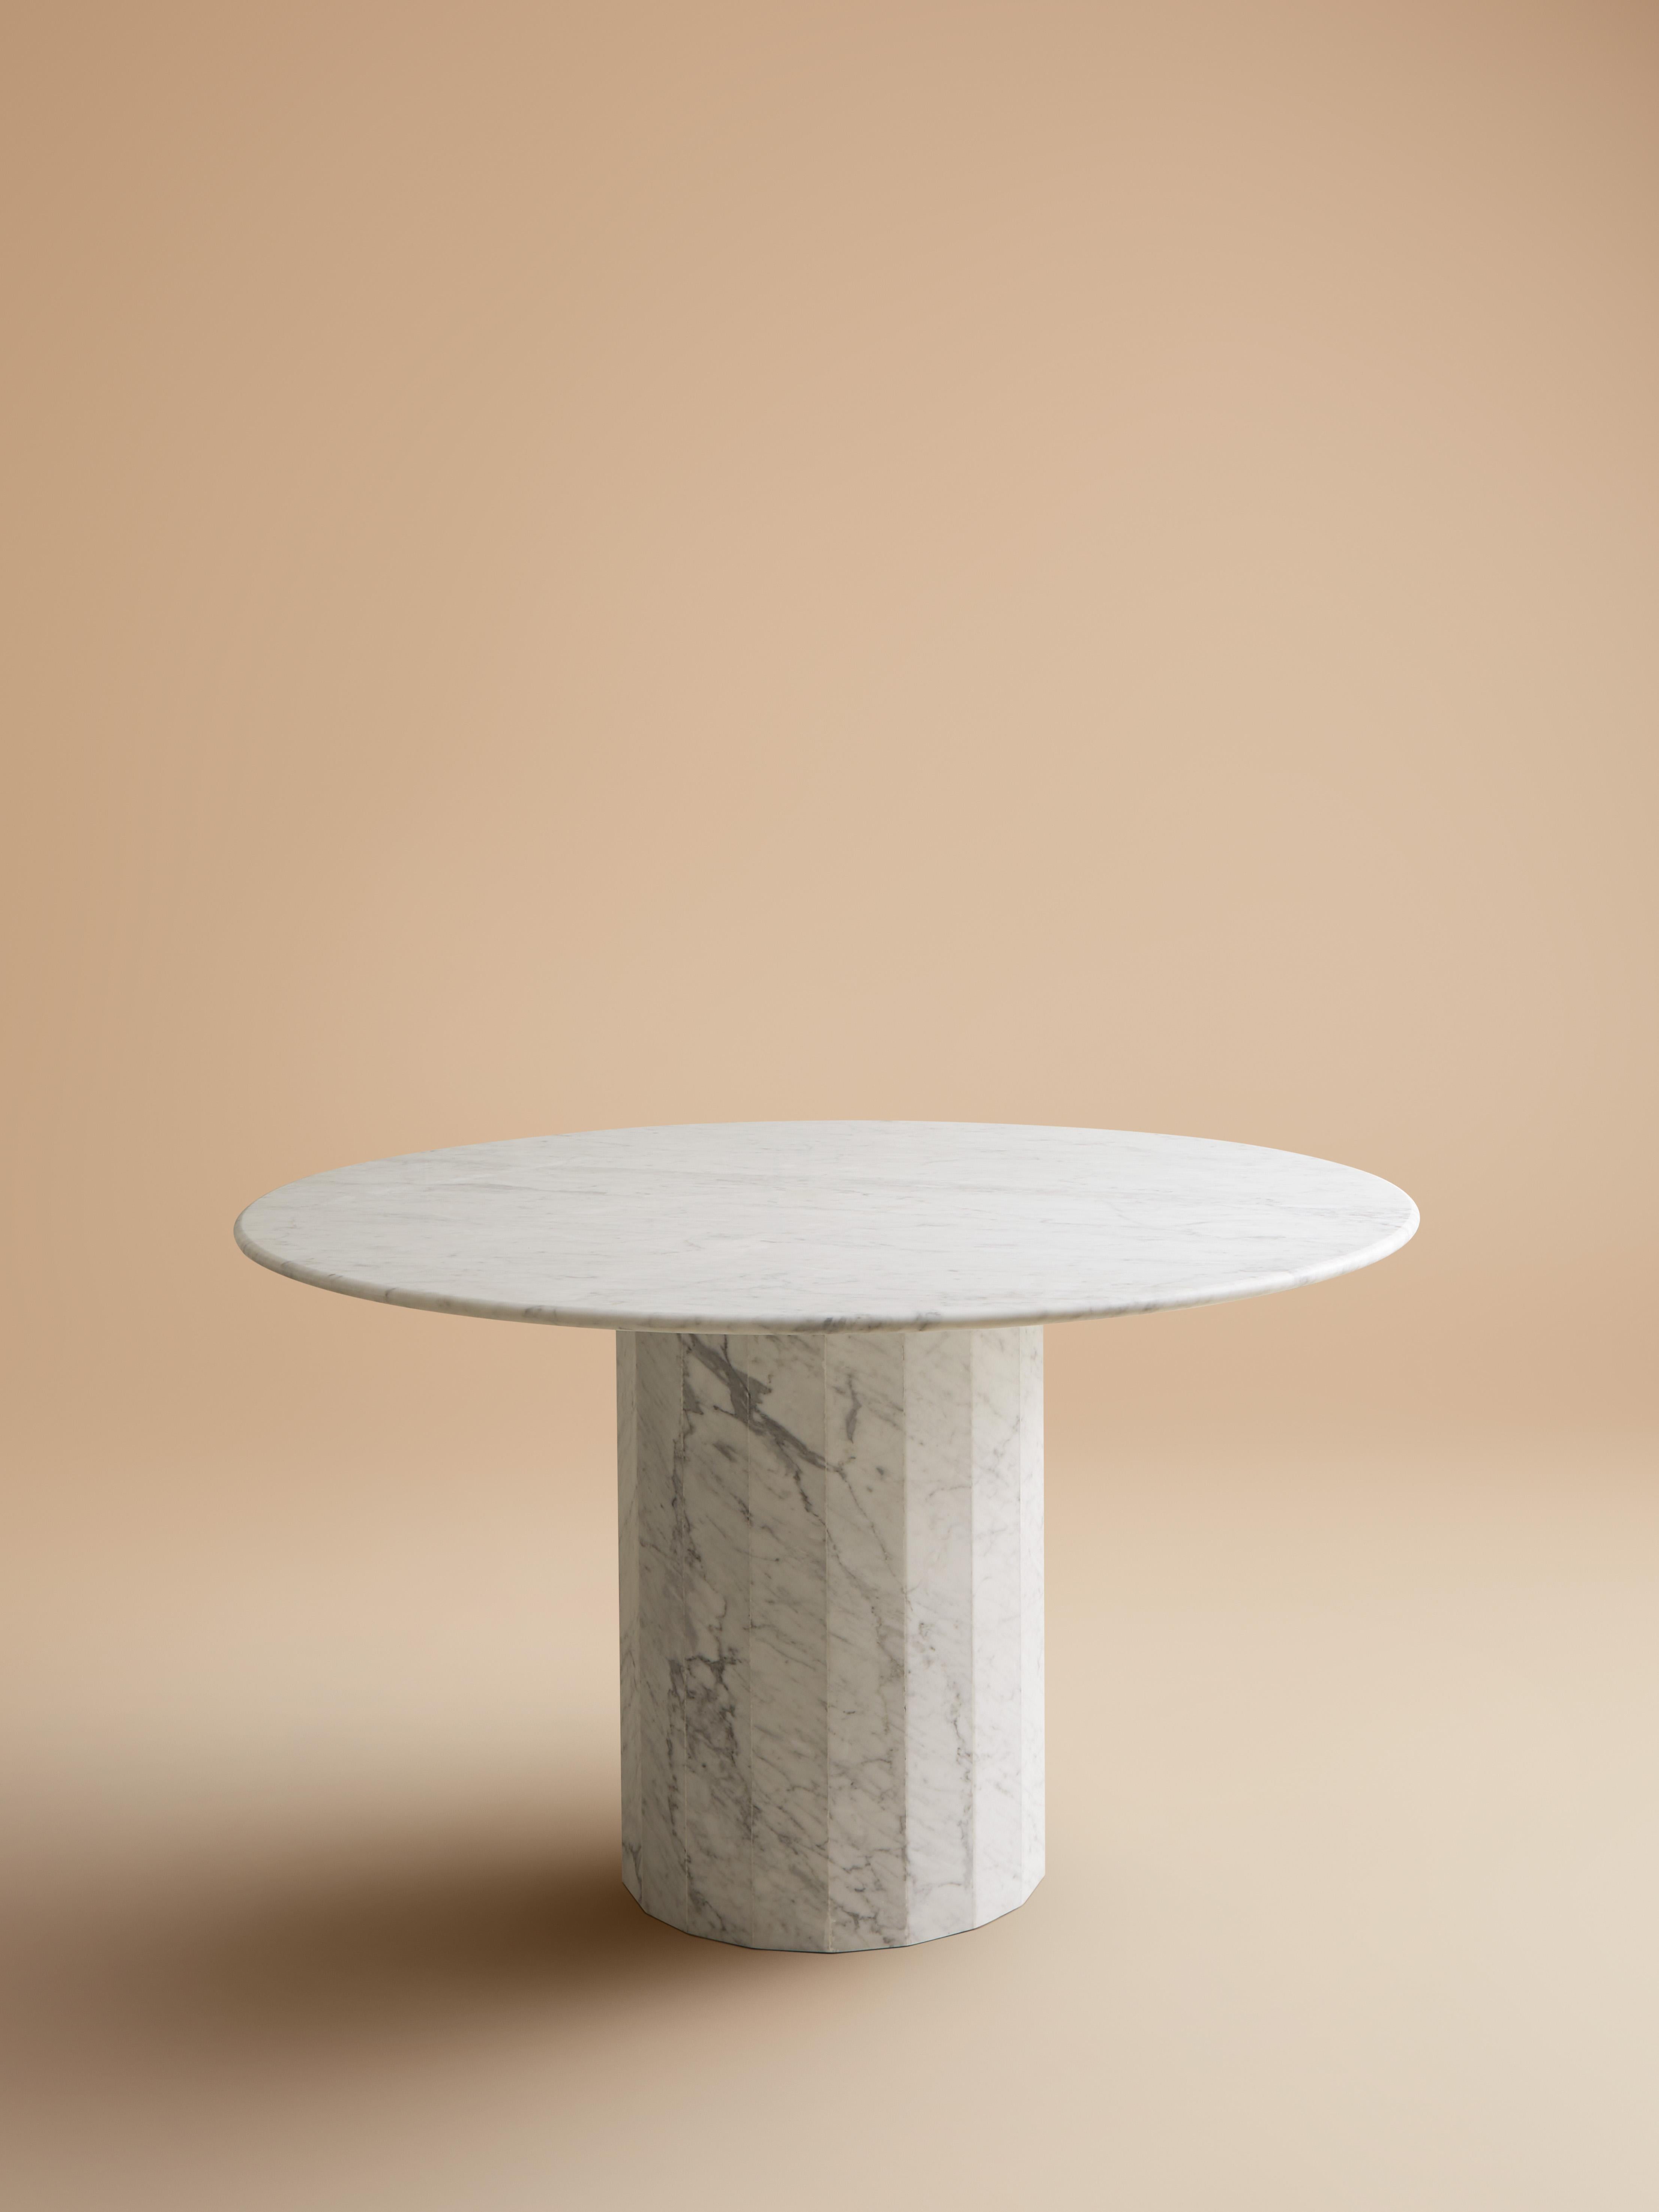 Contemporary Ashby Round Dining/Hall Table Handcrafted in Honed Bianco Carrara Marble